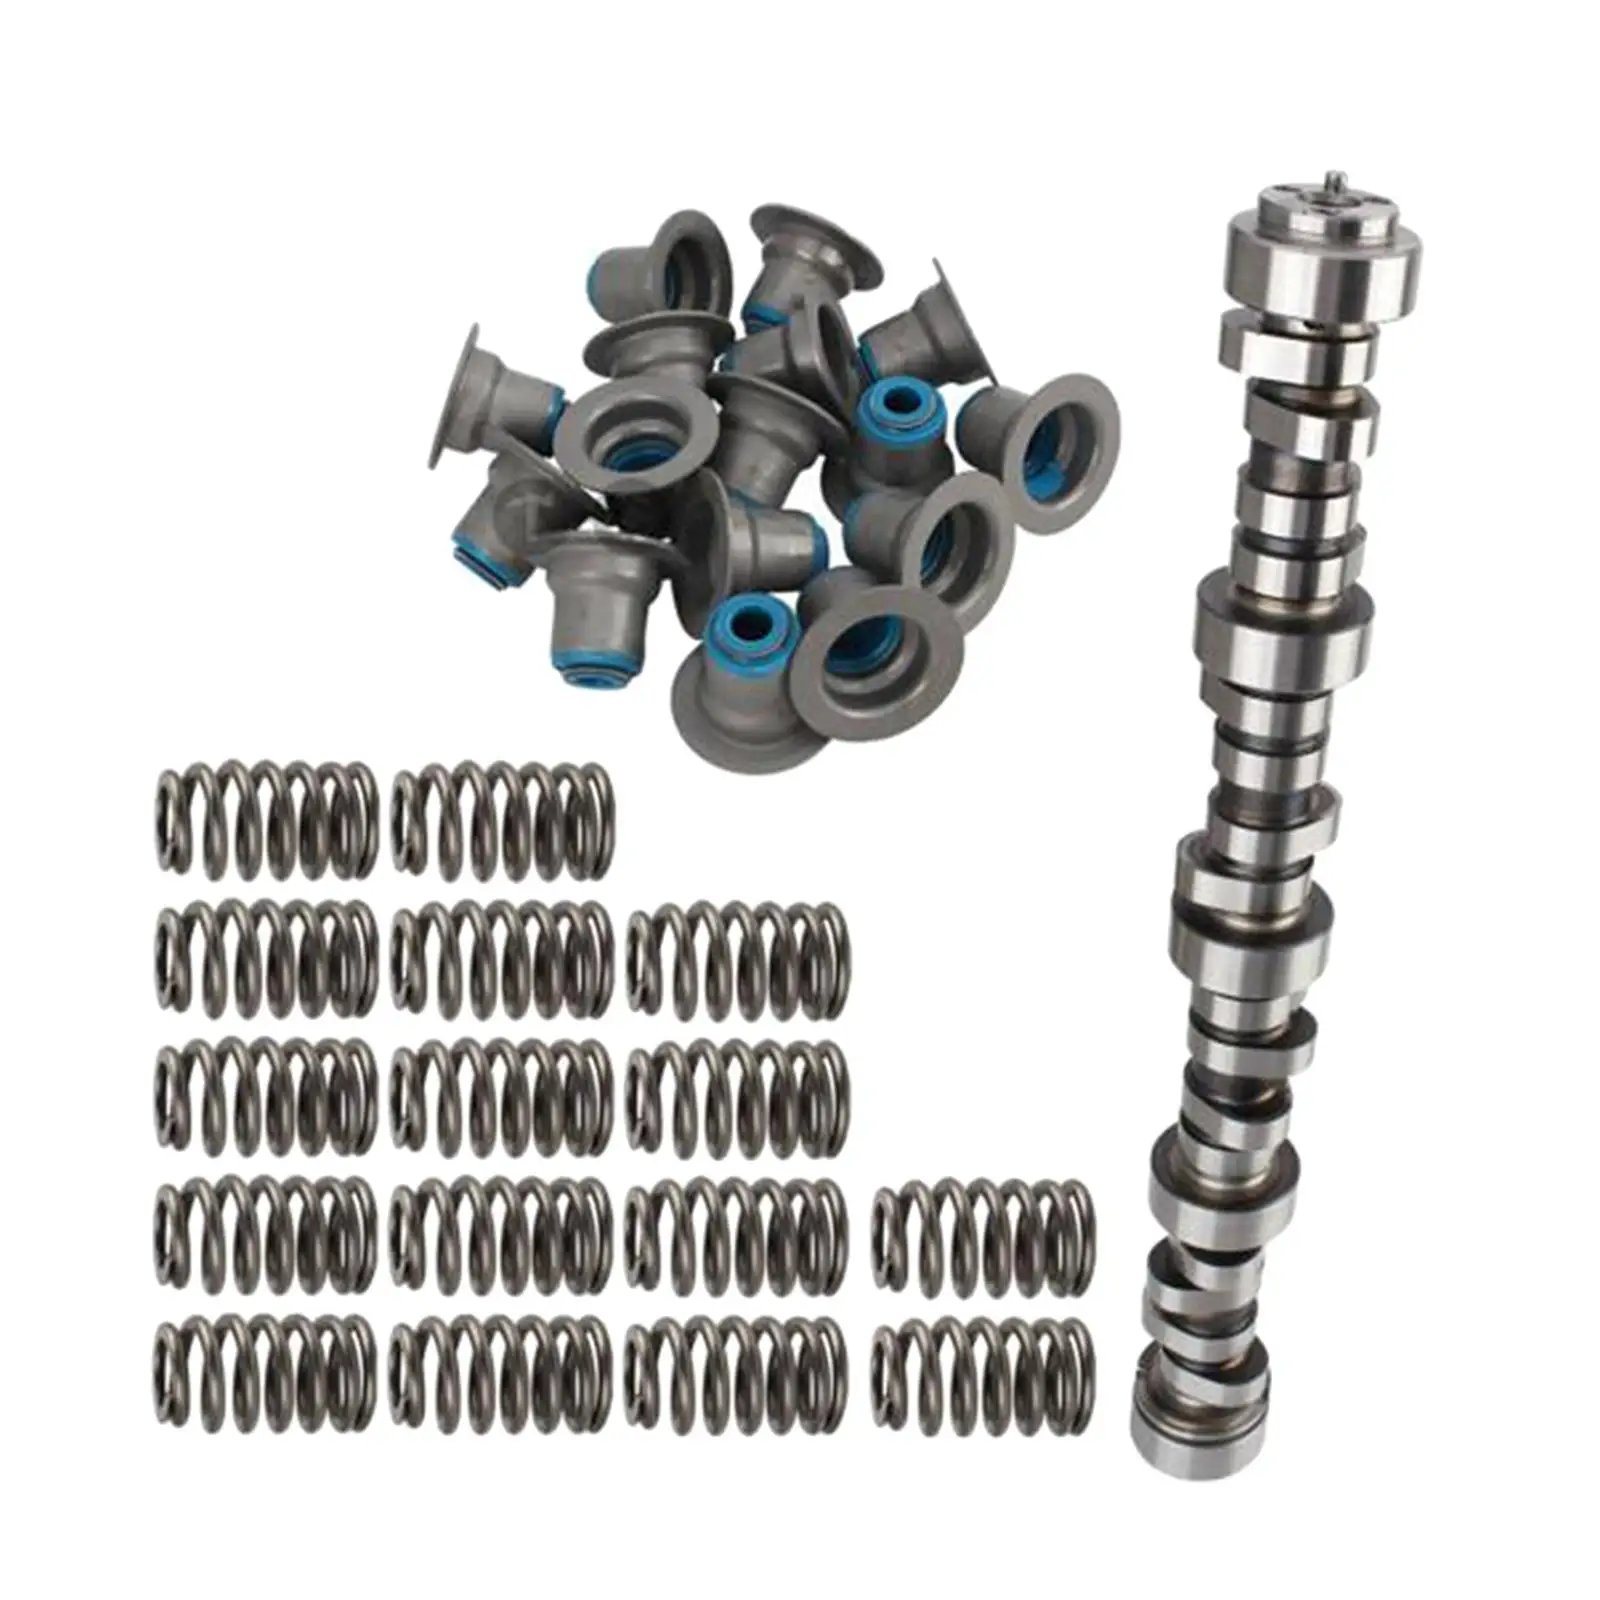 

cam Kit 31218132 Durable High Performance Camshaft Kit Replacement for Silverado Stage 2 4.8L 5.3L 6.0L 6.2L